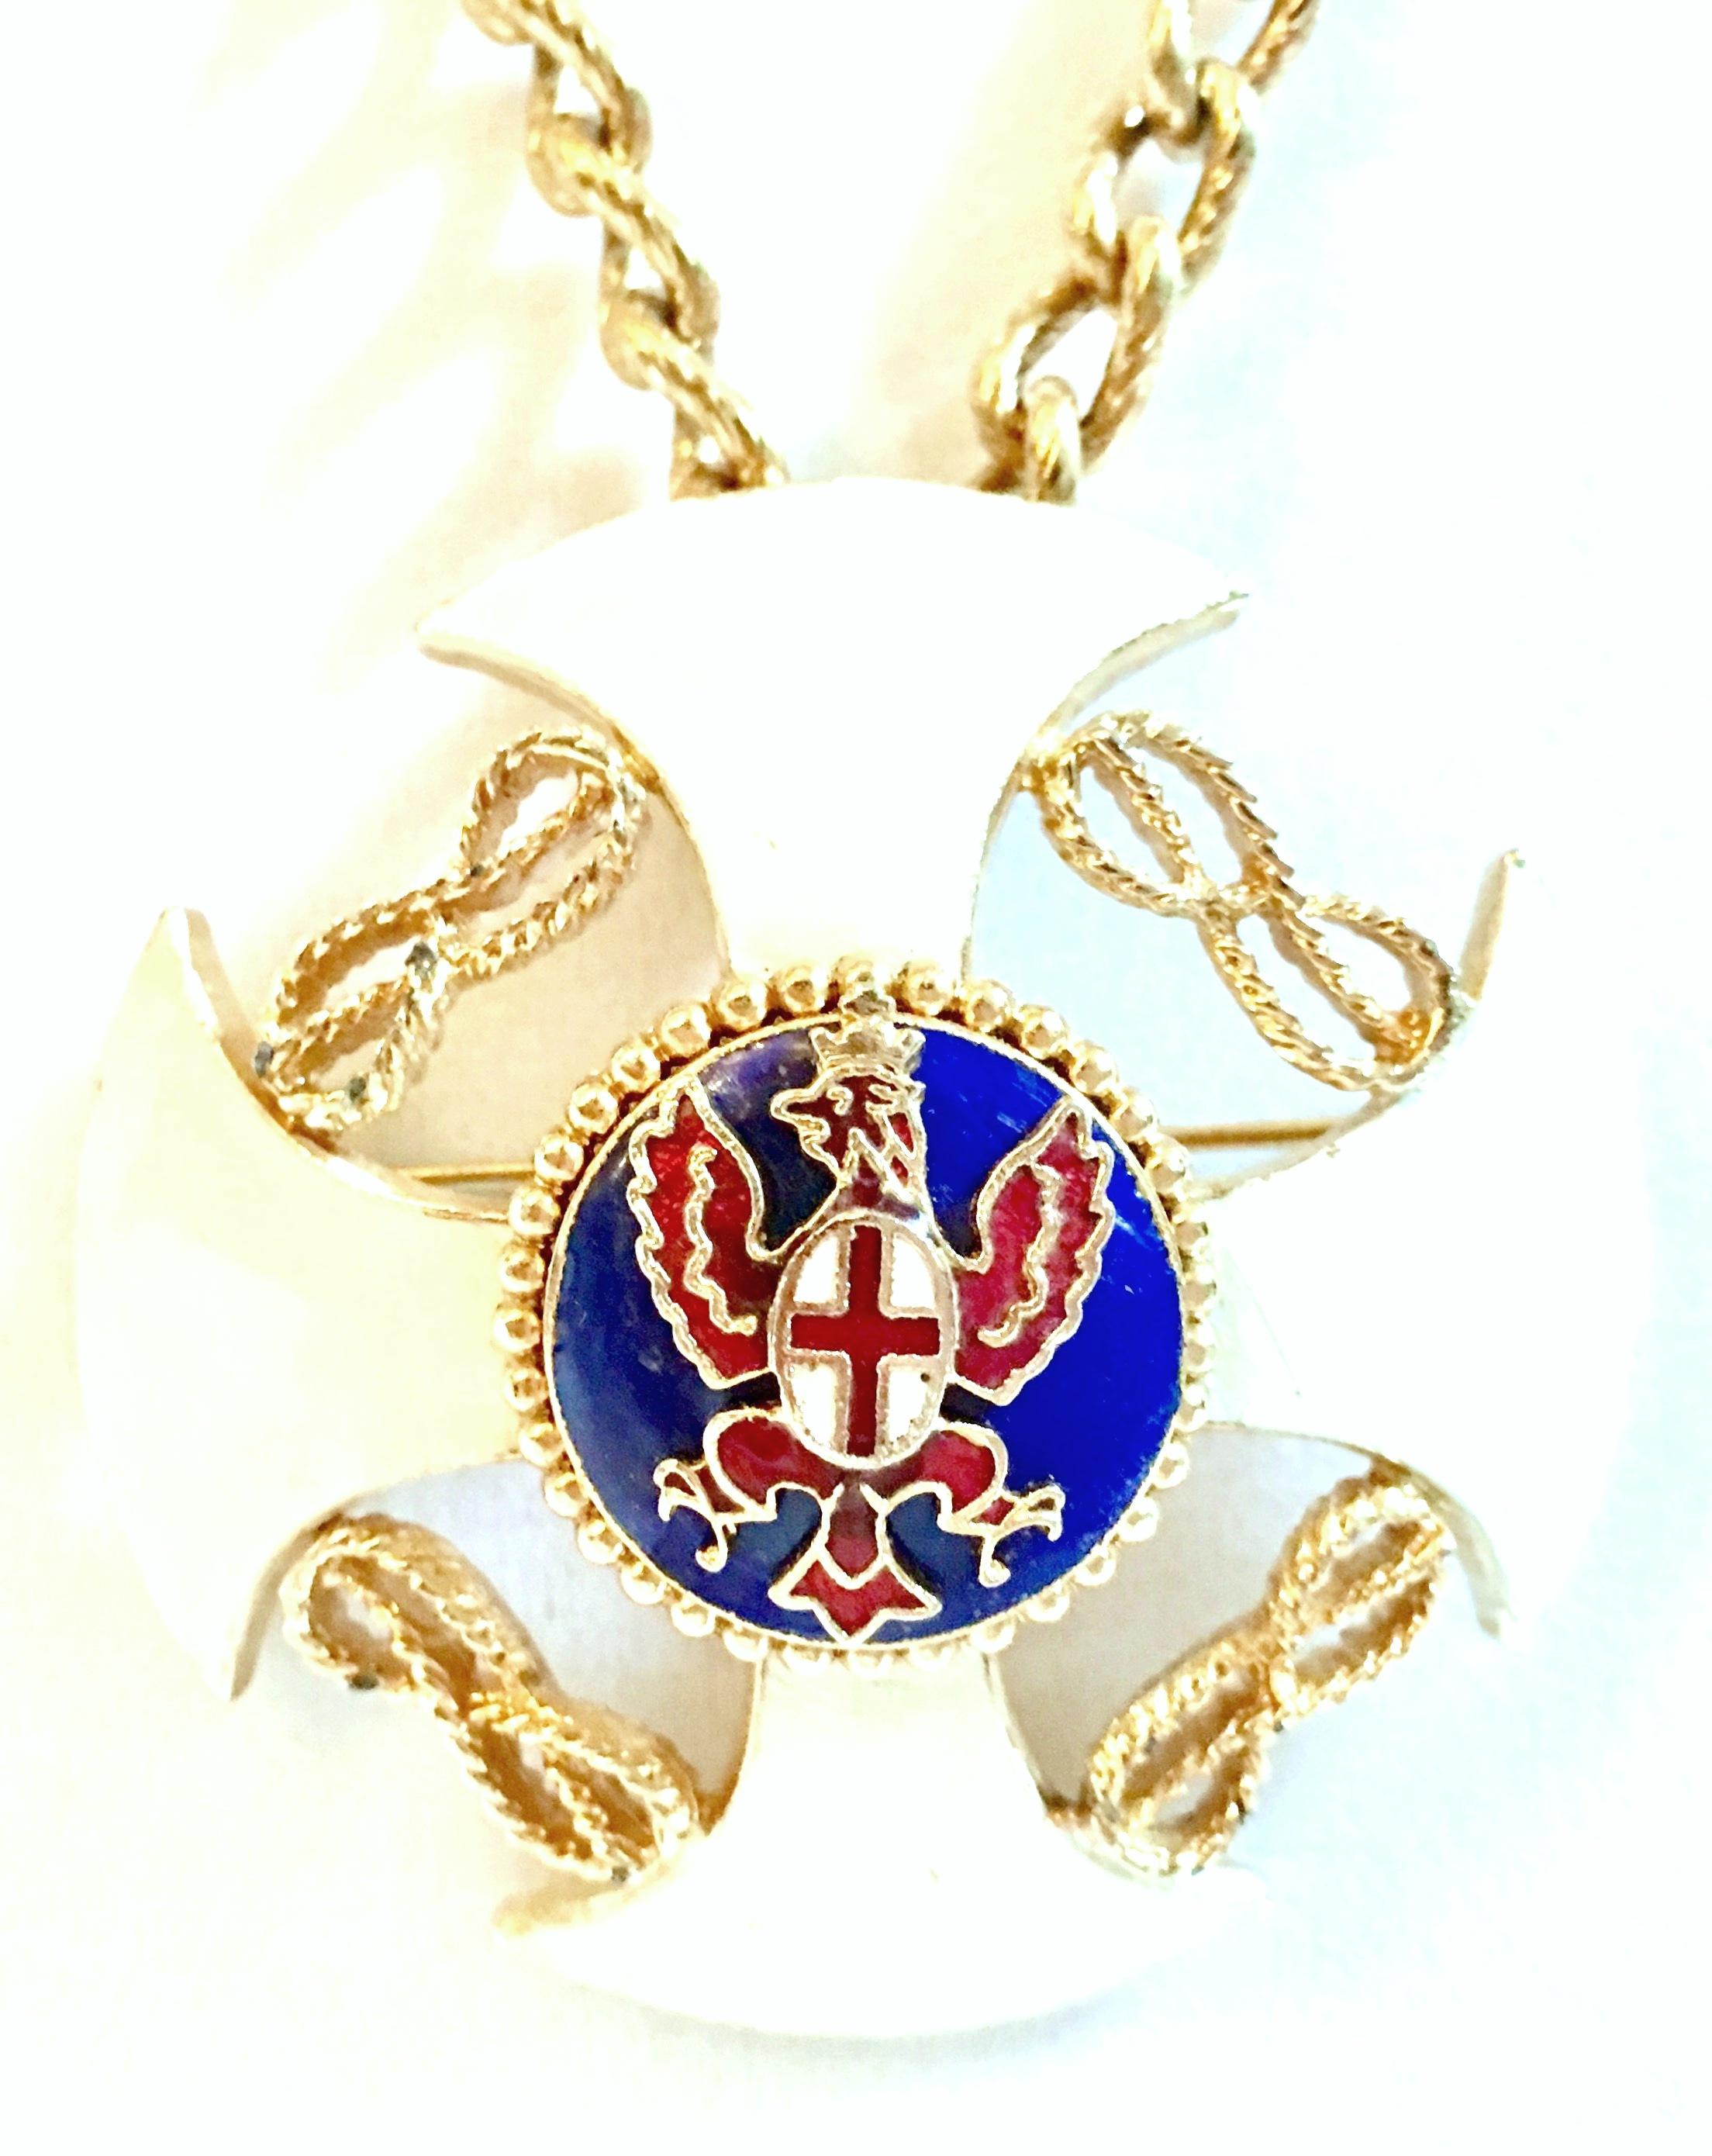 20th Century Gold & Enamel Crest Cross Brooch &Pendant Necklace By, Monet For Sale 2